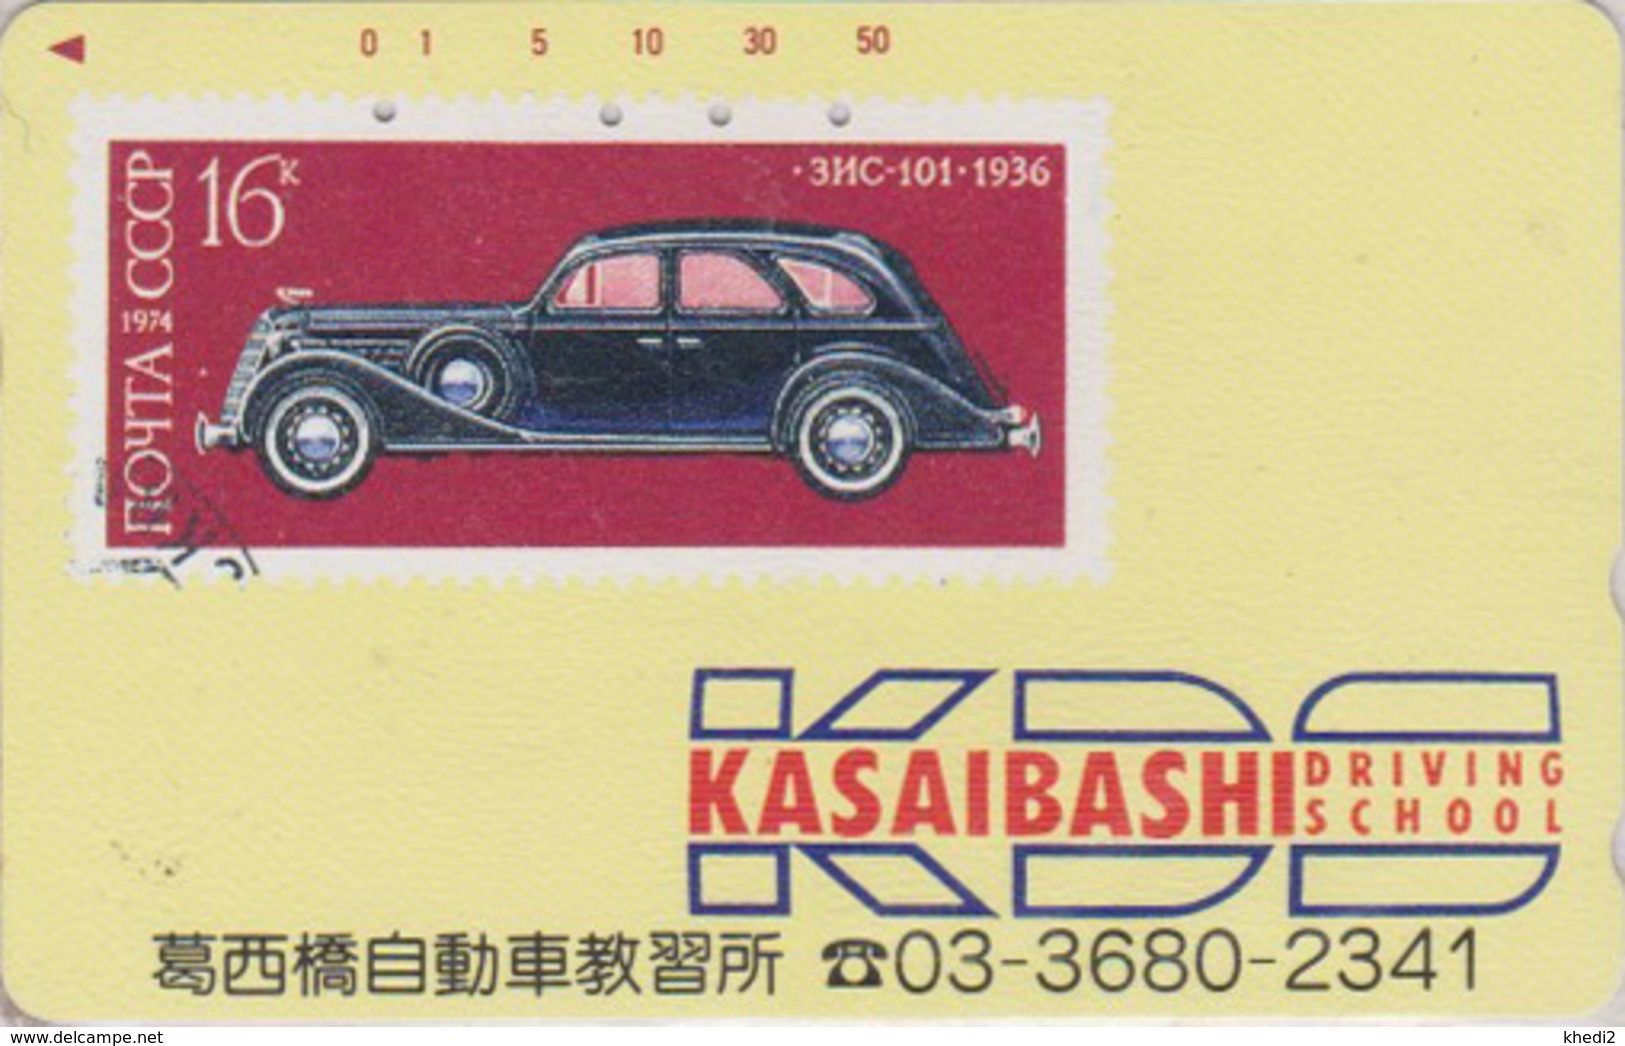 TC JAPON / 110-166836 - VIEILLE VOITURE Sur TIMBRE RUSSIE CCCP - OLDTIMER CAR On RUSSIA STAMP JAPAN Free Phonecard 104 - Stamps & Coins